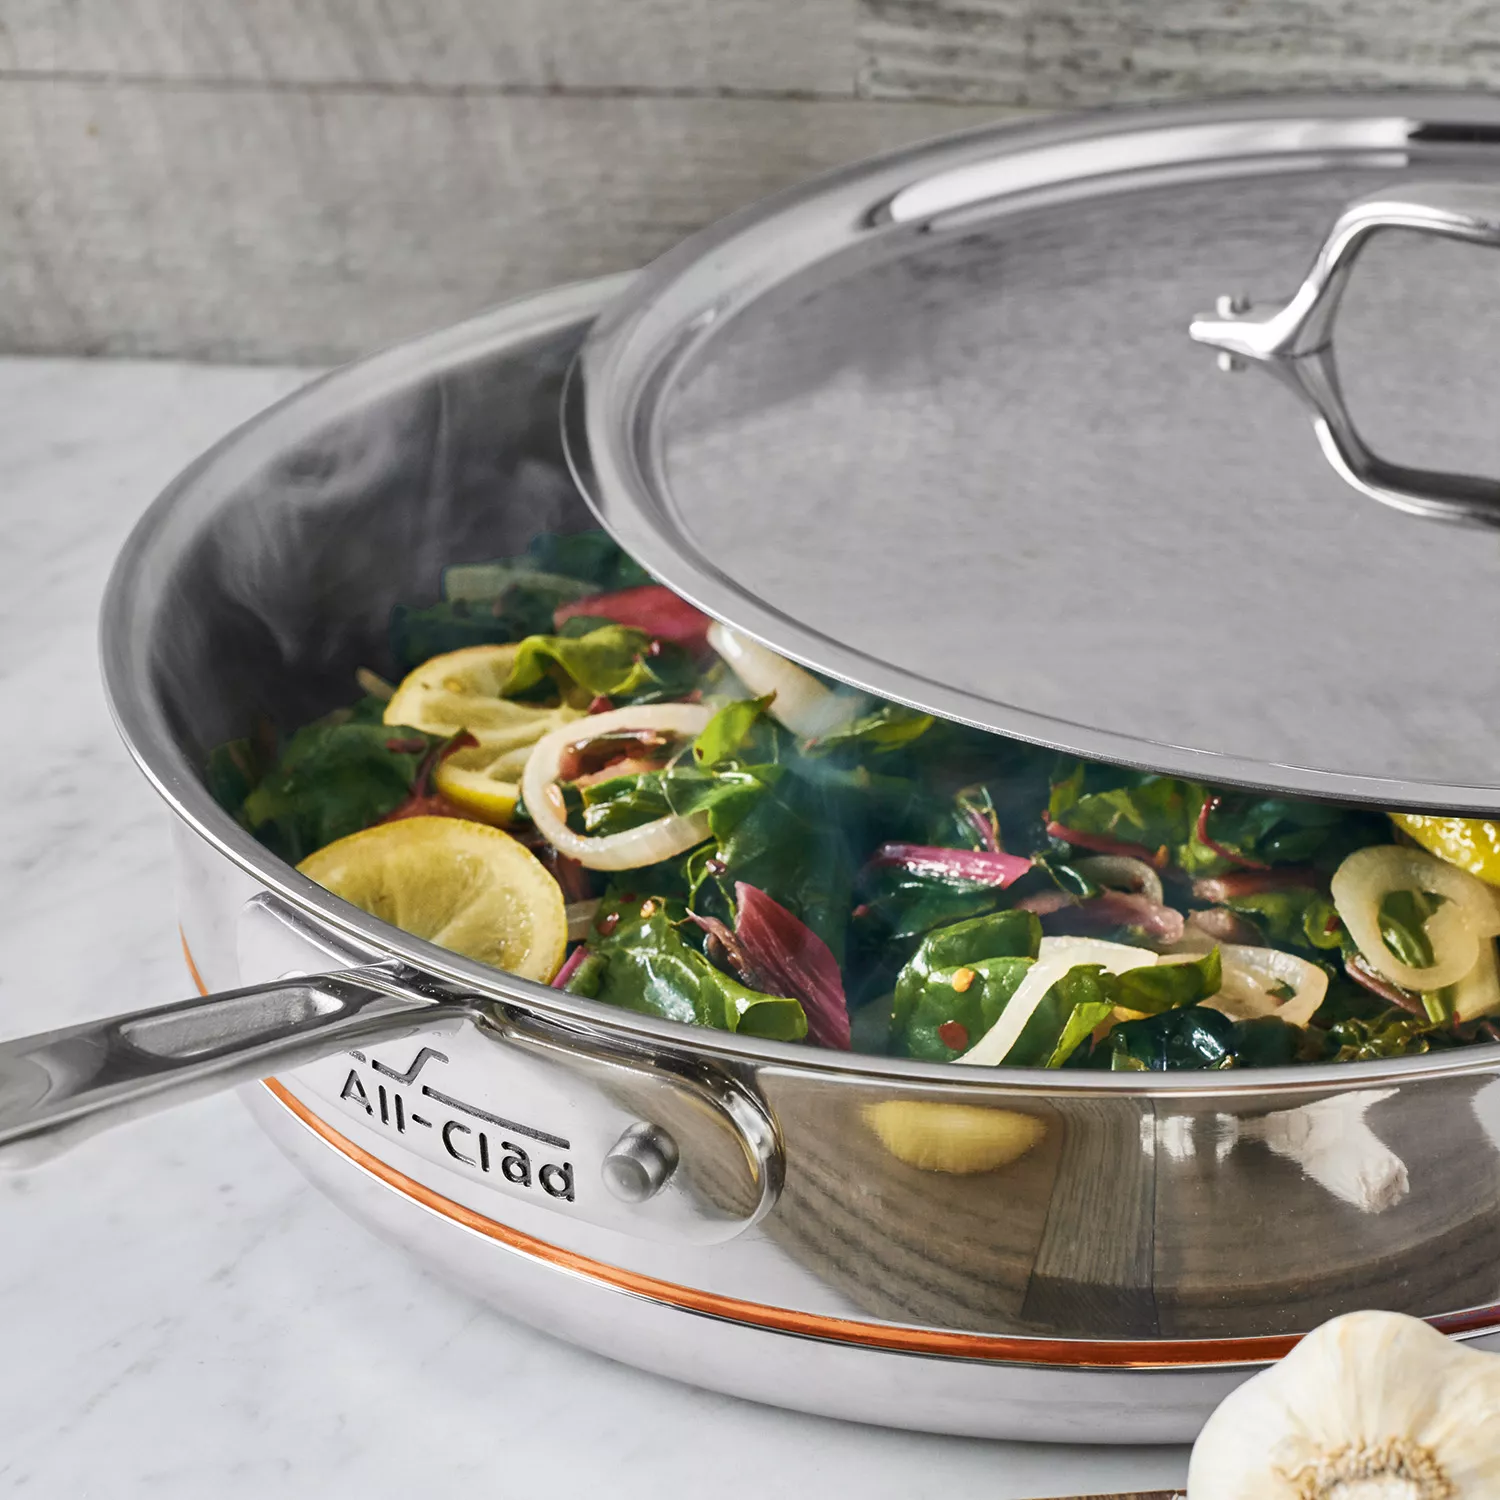 Introductory Offer All Clad Copper Core 6 qt. Saute Pan with Lid